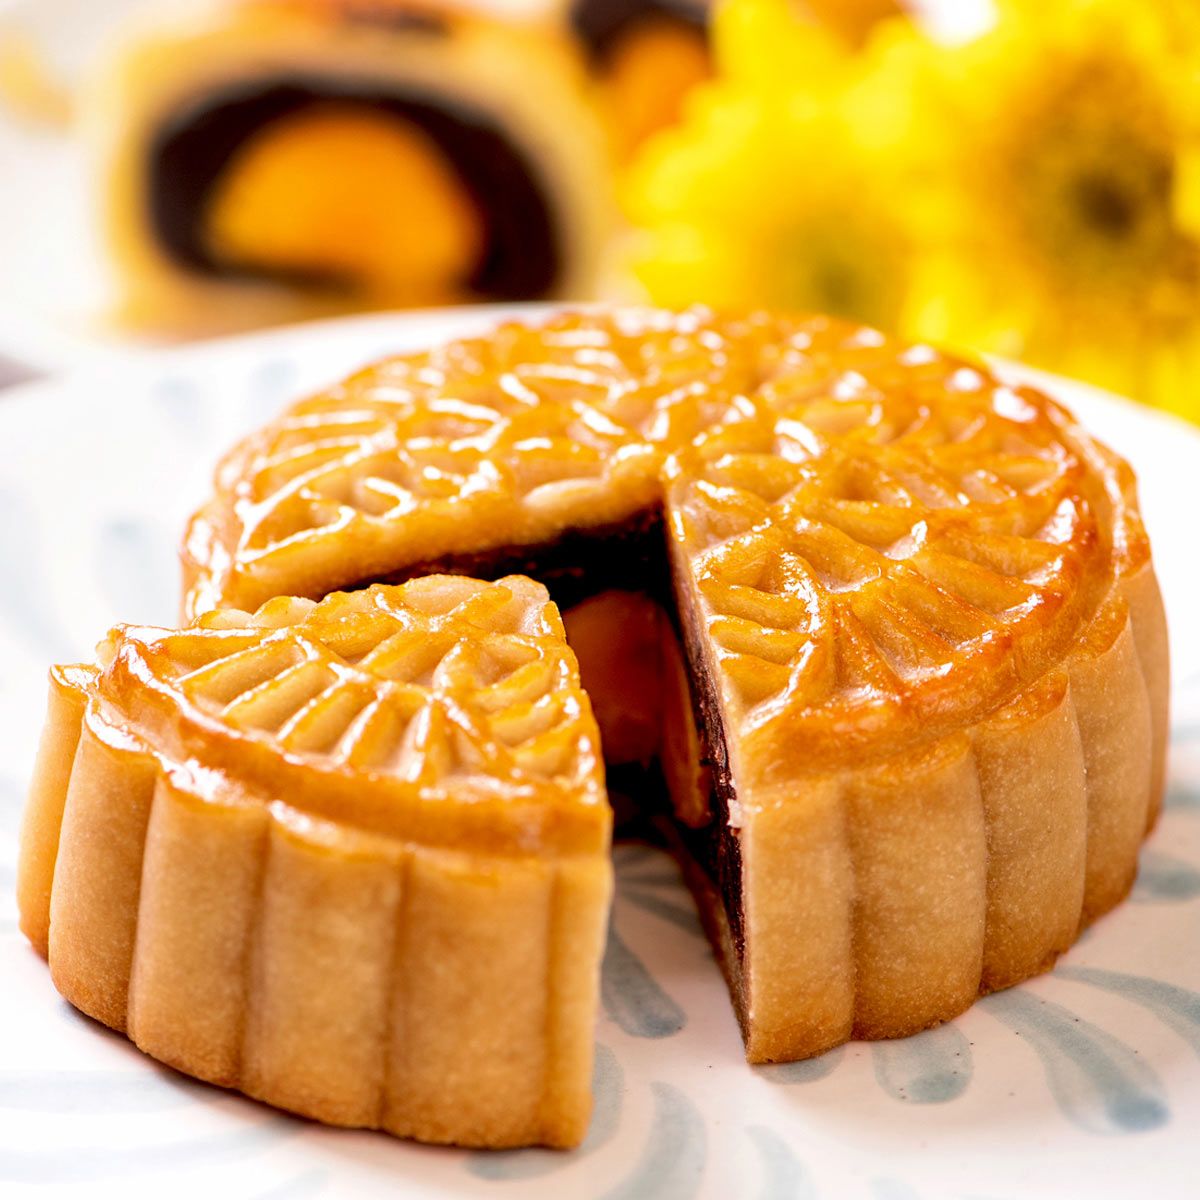 Free Photos | Anko-rich rice cake with Japanese sweets on the table